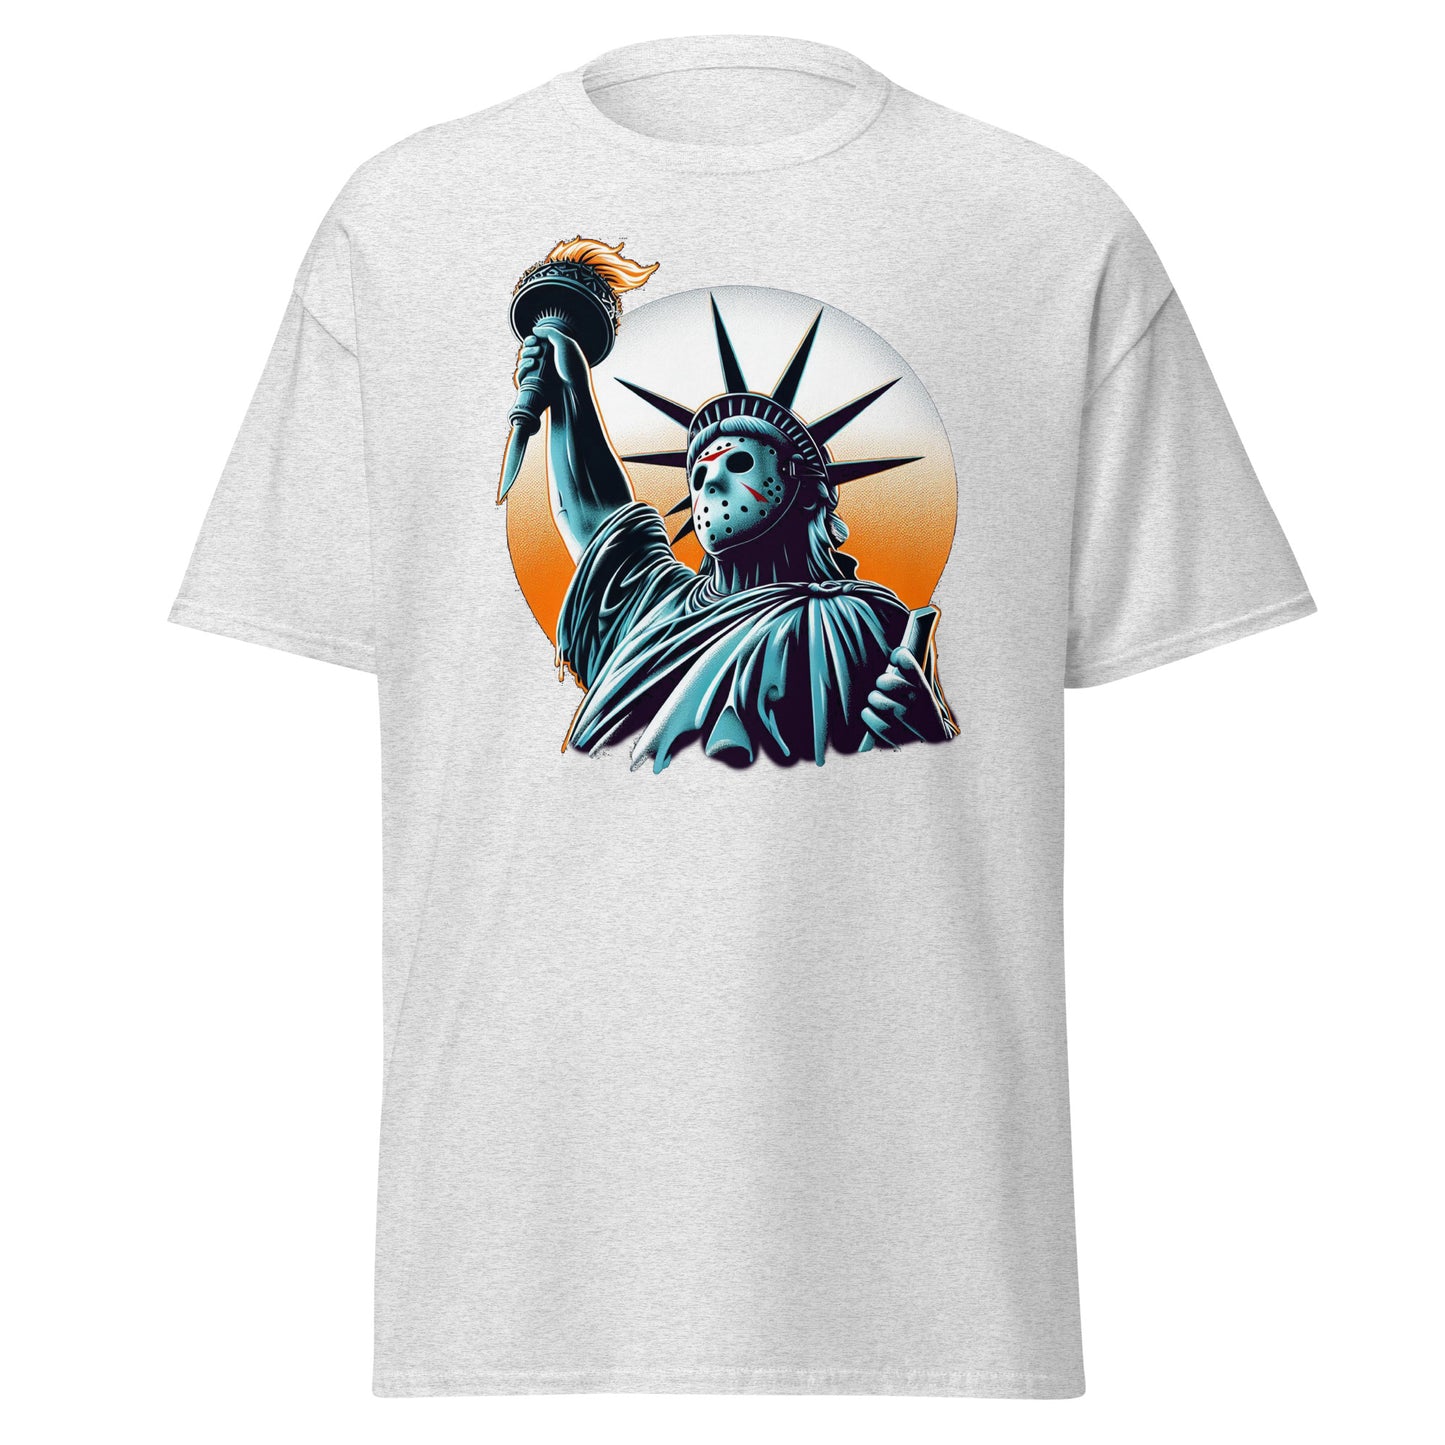 Embrace the Horror with Our Jason Voorhees Statue of Liberty T-Shirt!